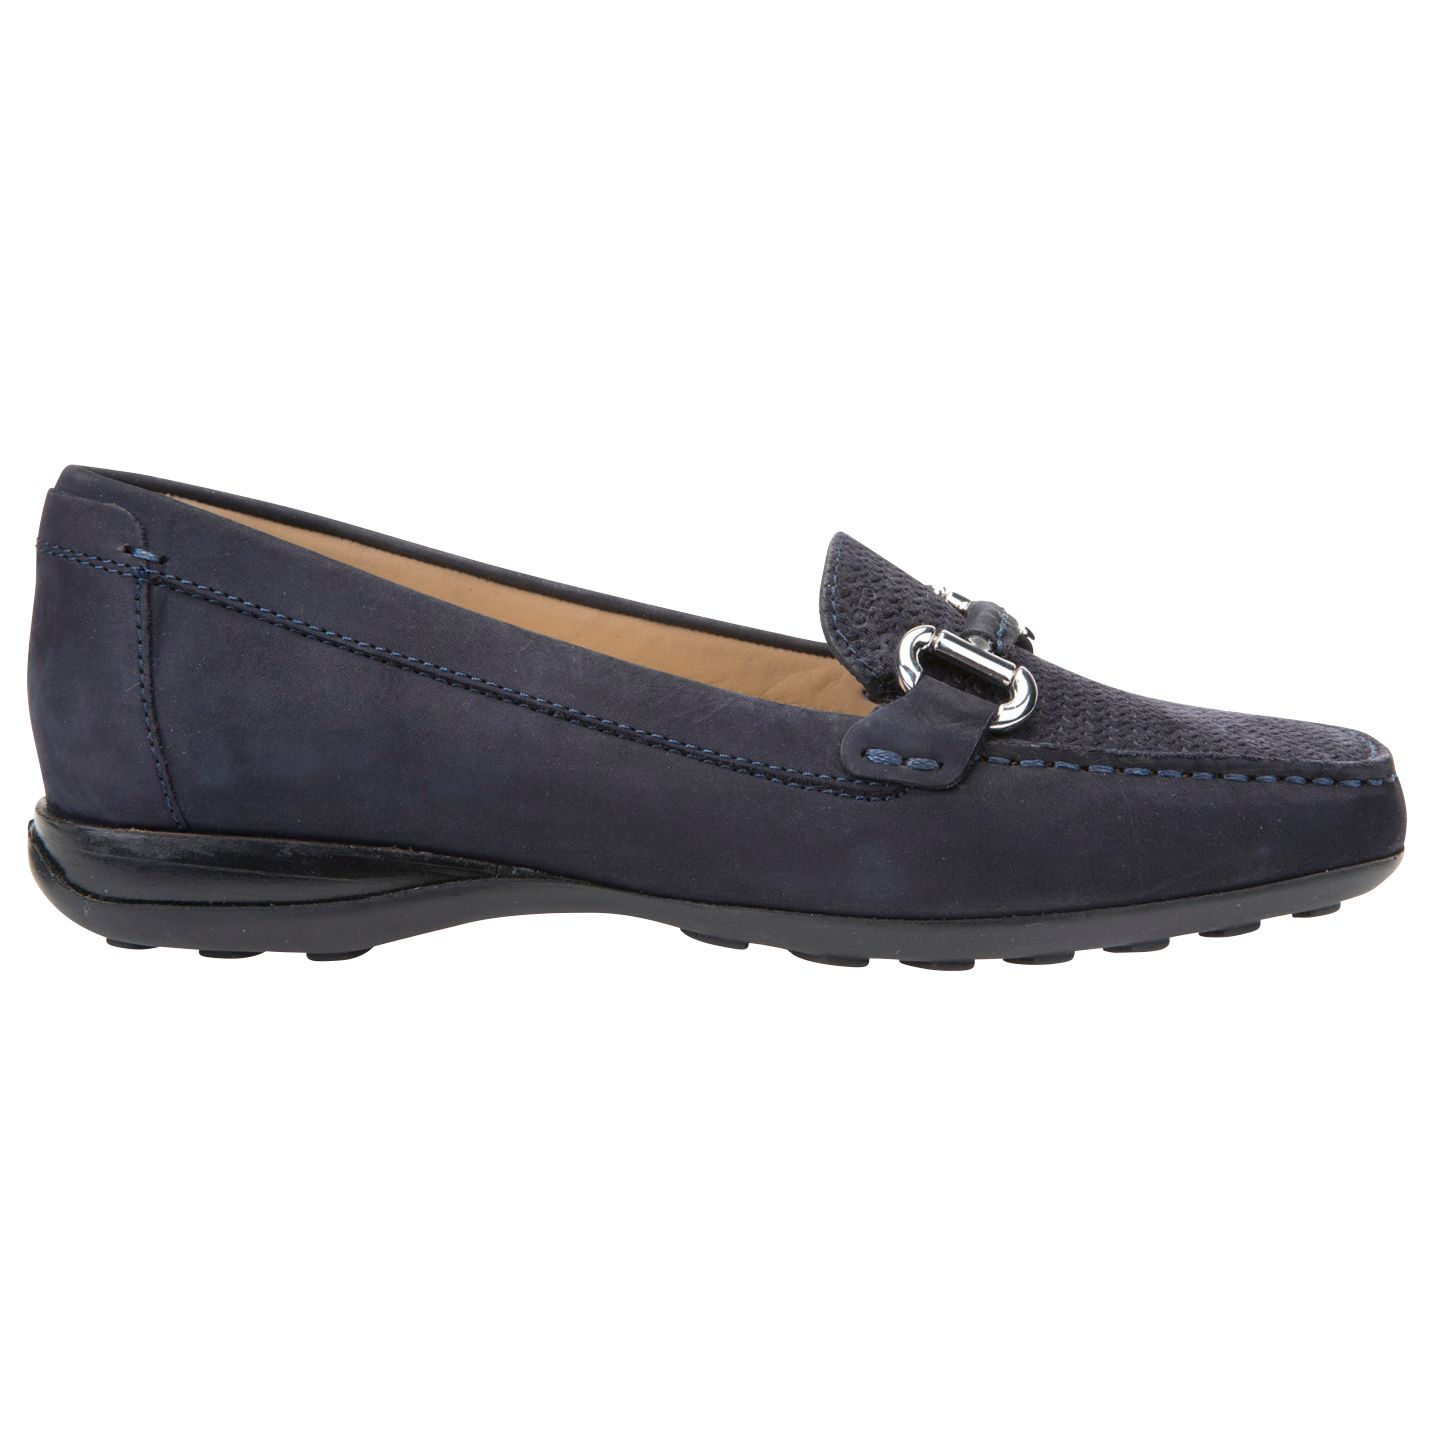 Geox Euro Flat Slip On Loafers, Navy